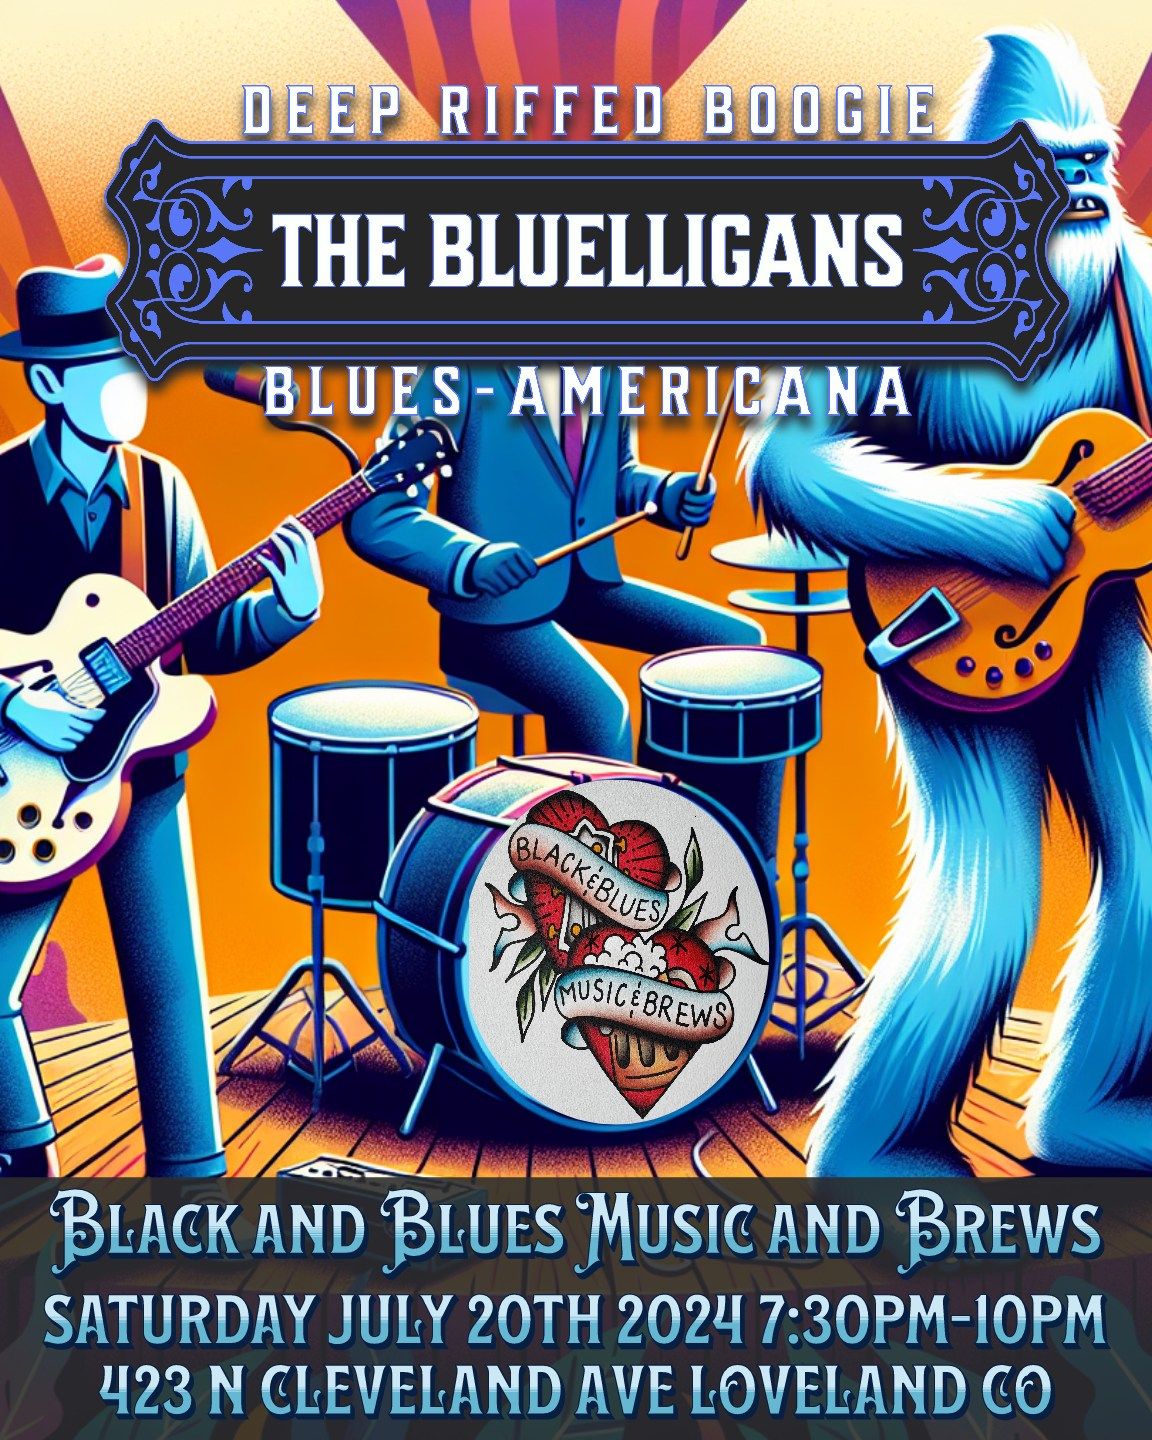 Black and Blues Music and Brews presents The Bluelligans!